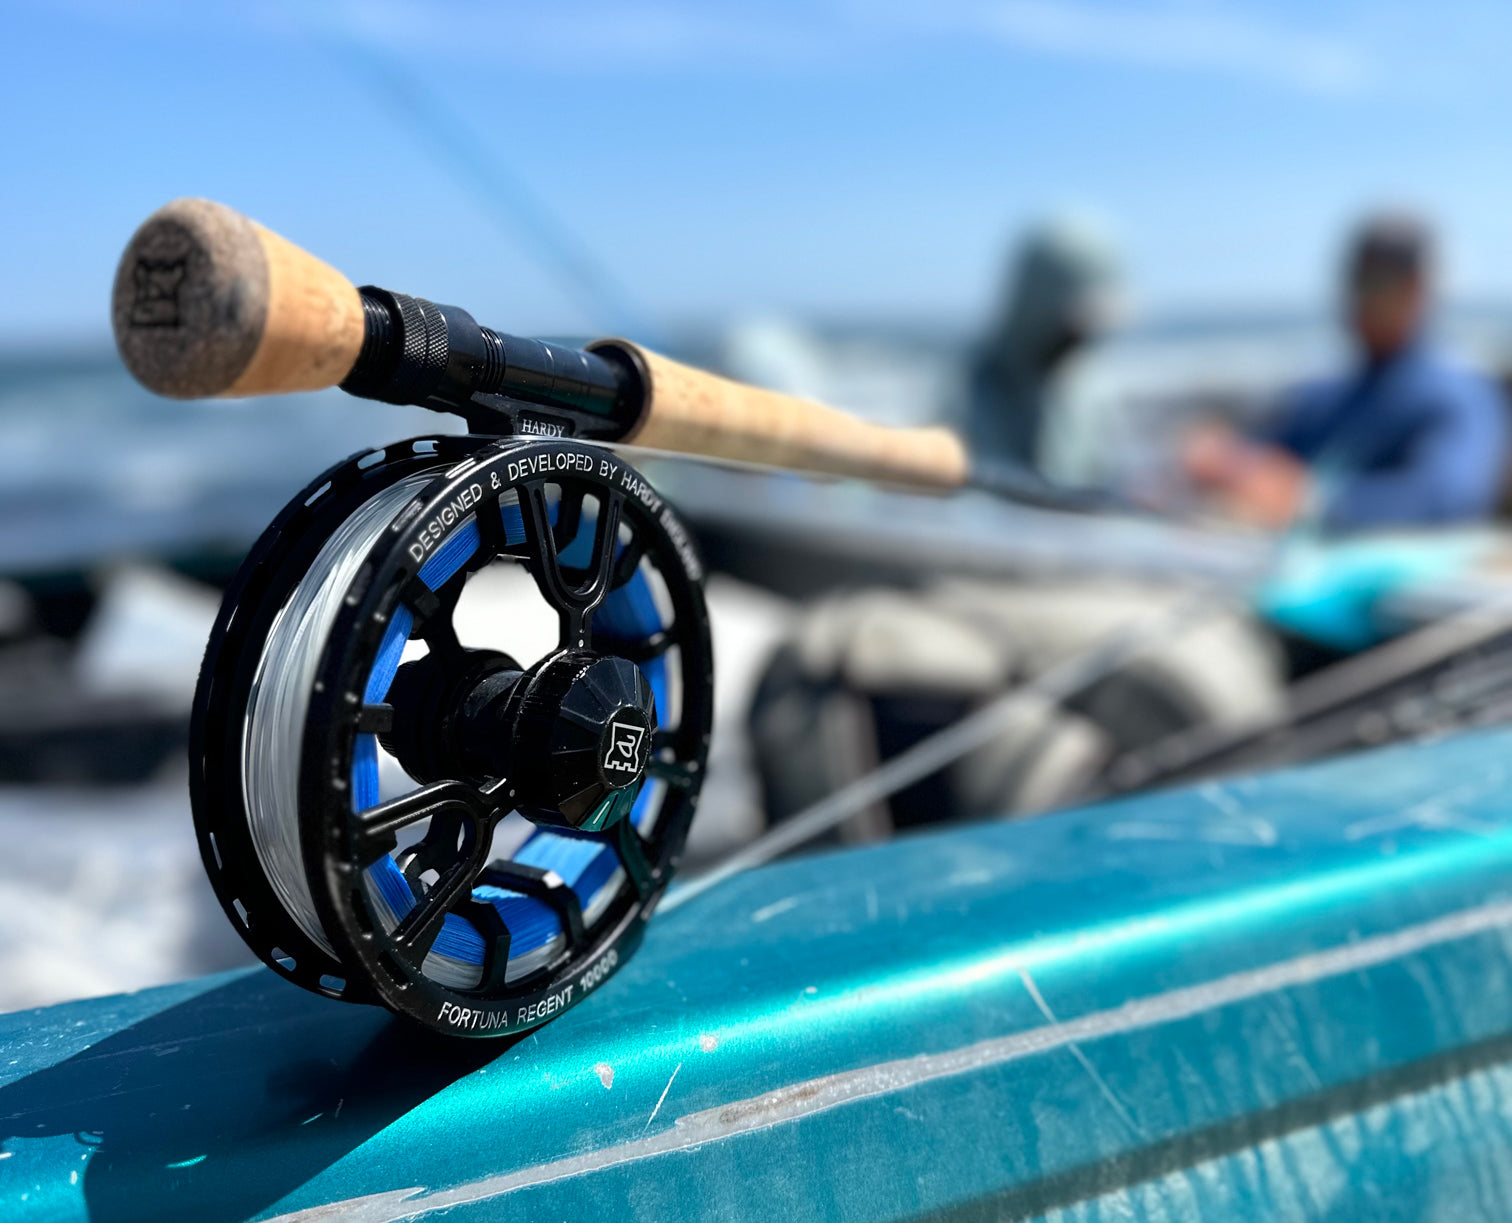 Closeup shot of a fly reel and rod